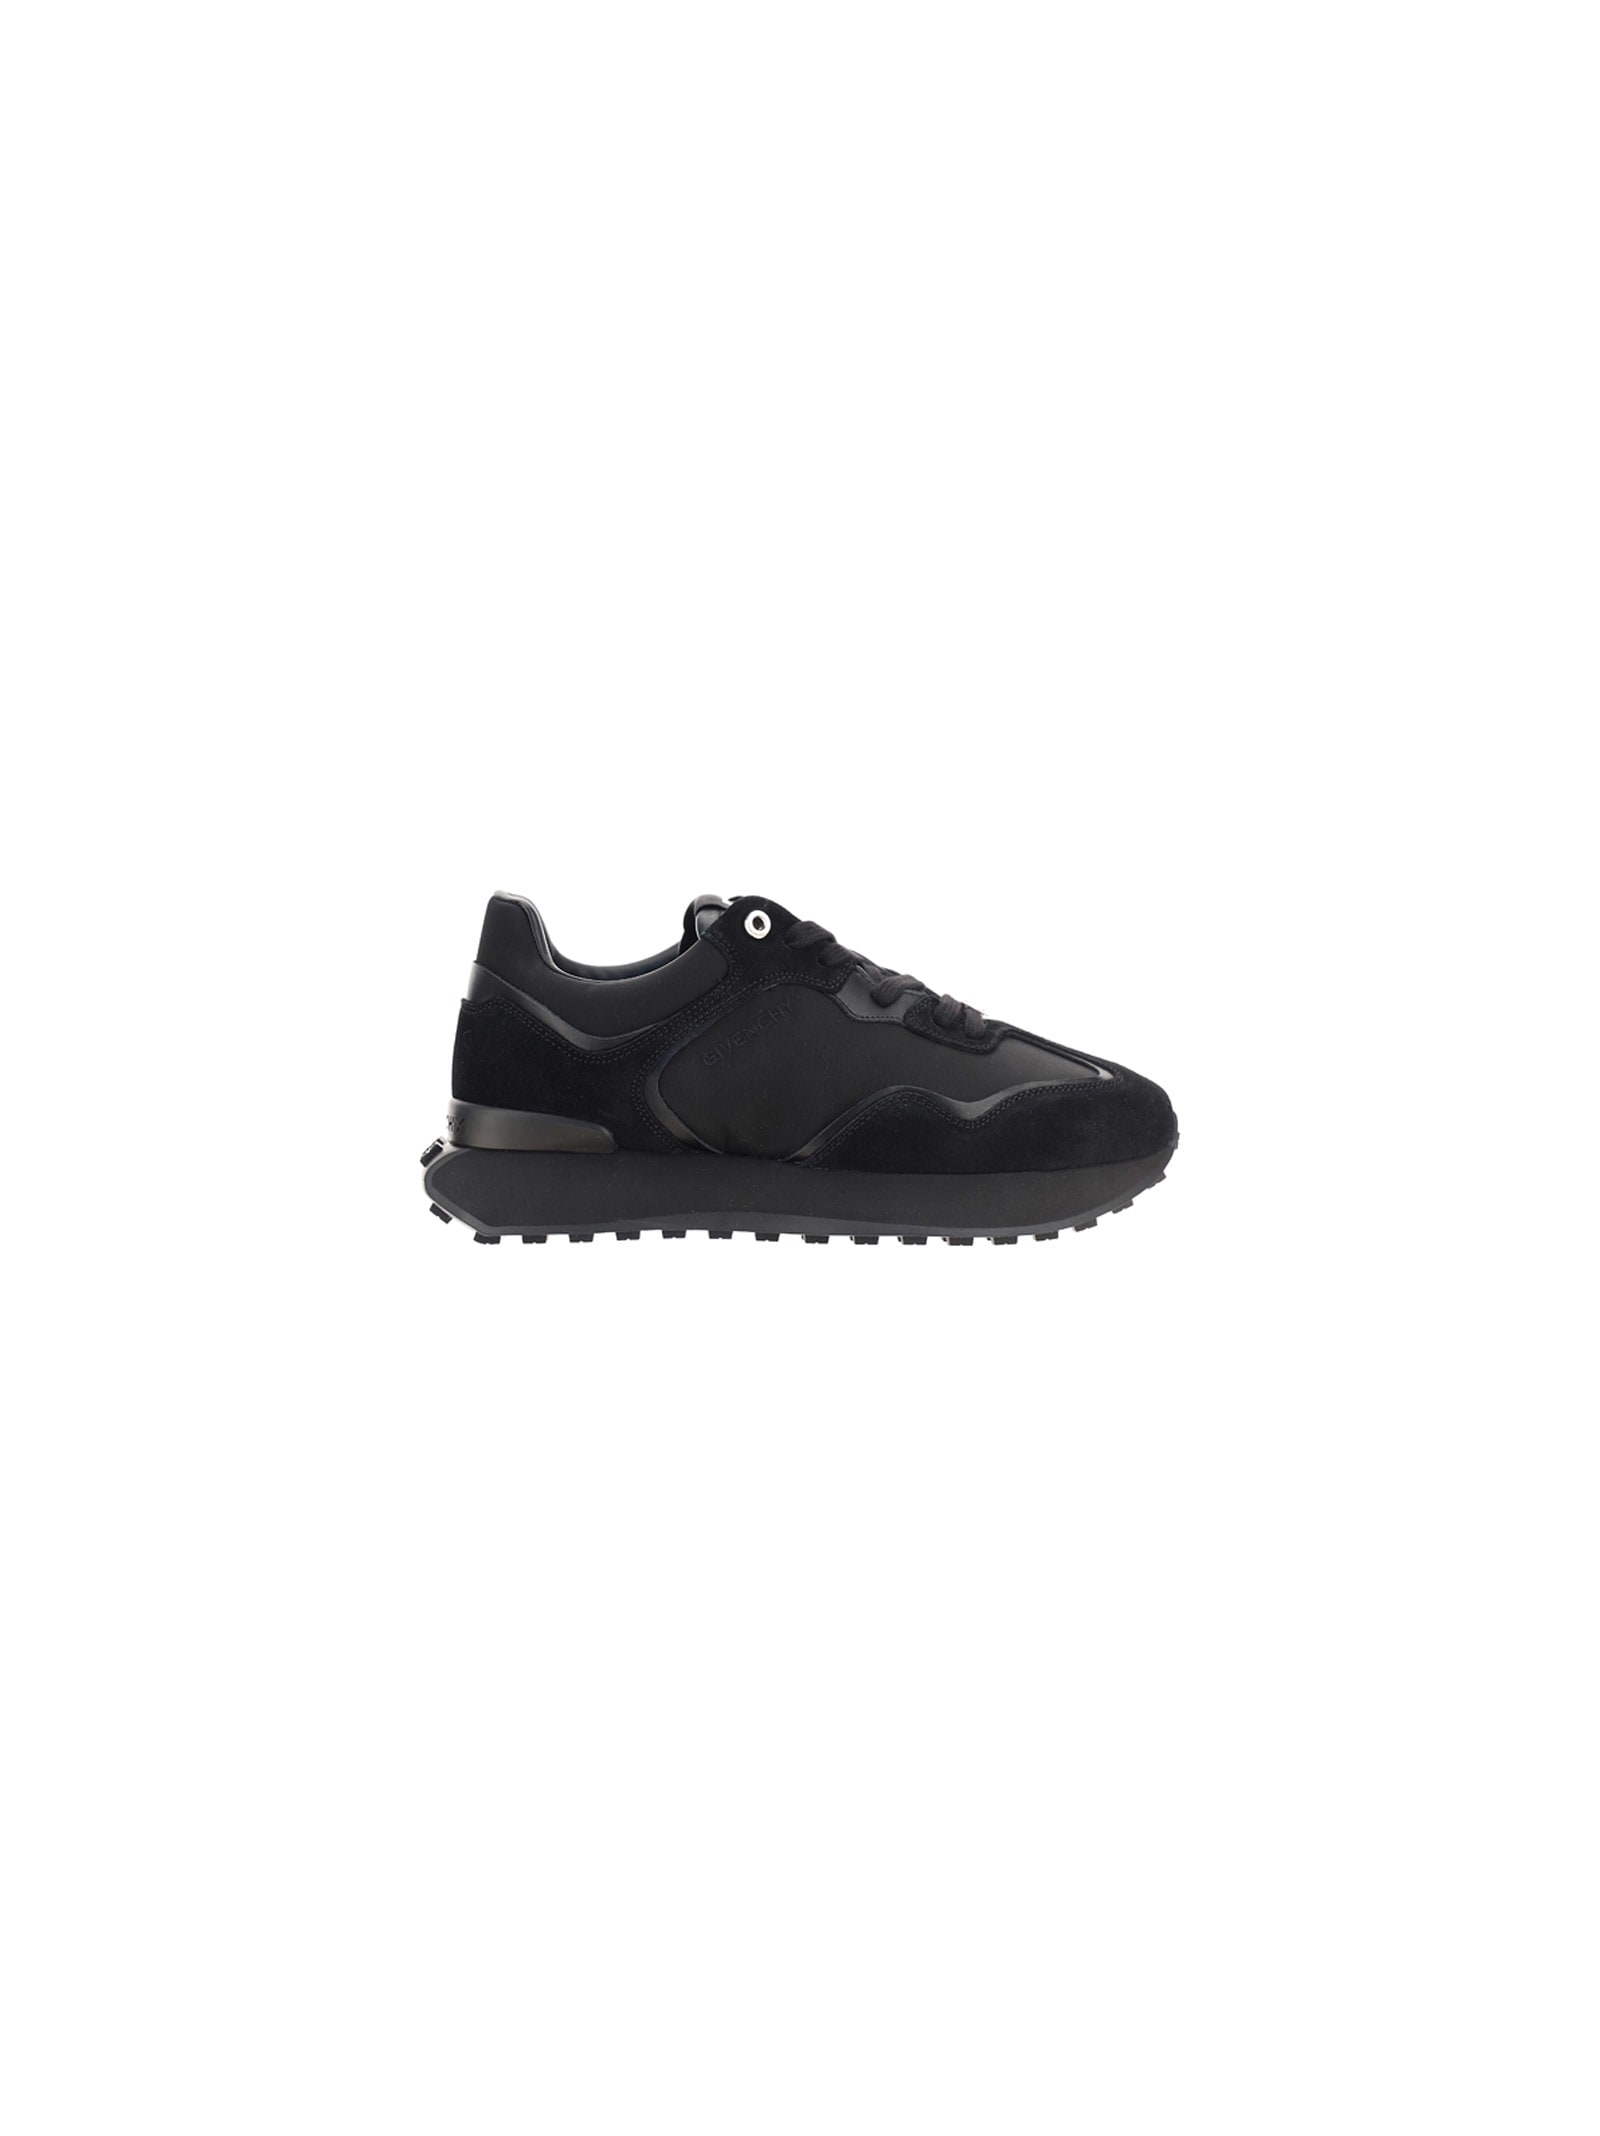 GIVENCHY GIV RUNNER SNEAKERS,BH005CH0VU 001